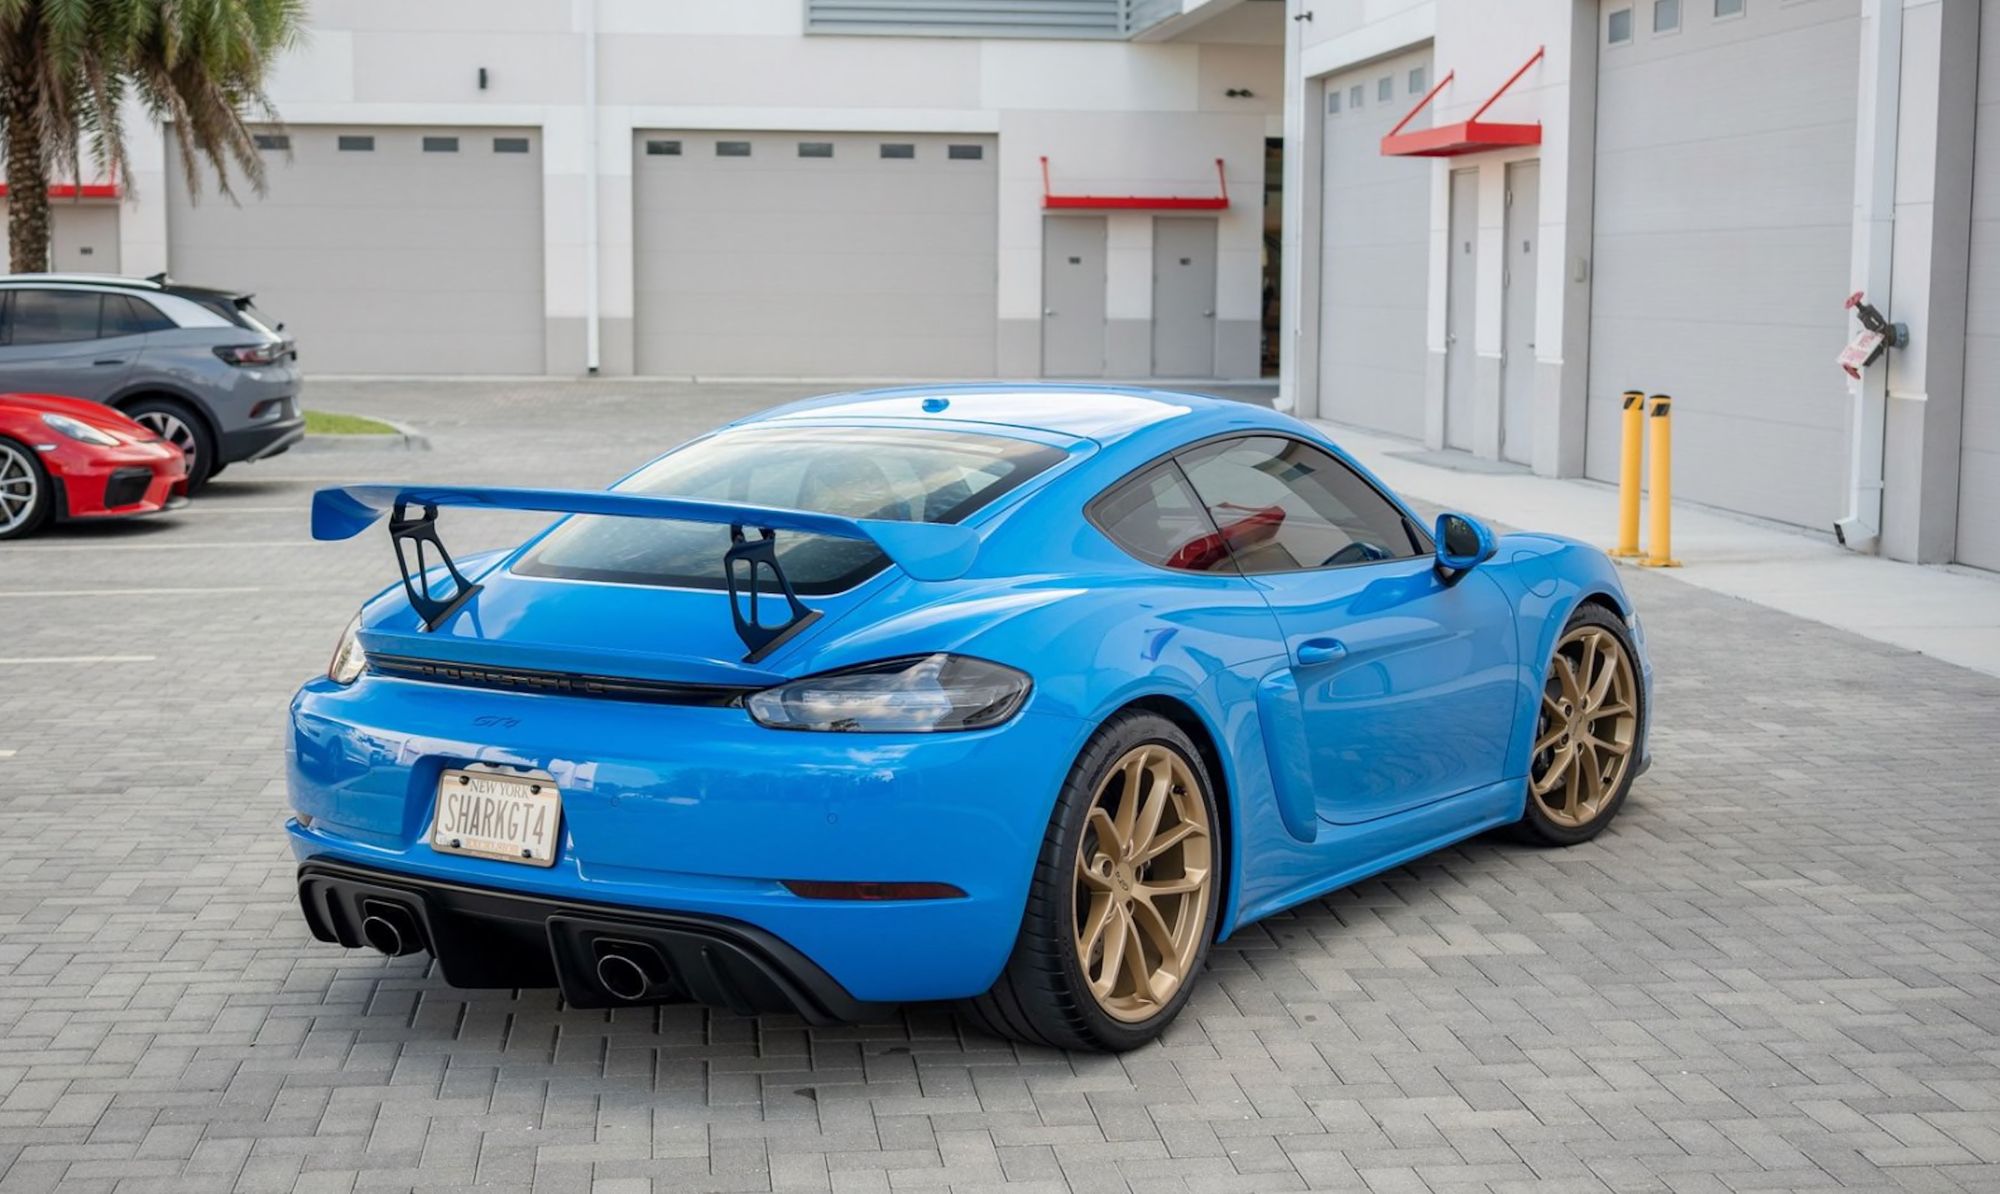 handpicked, sports, american, news, newsletter, highlights, muscle, client, classic, modern classic, europe, features, luxury, trucks, celebrity, off-road, german, italian, shark blue porsche cayman gt4 could be in your garage for just twenty-five bucks!